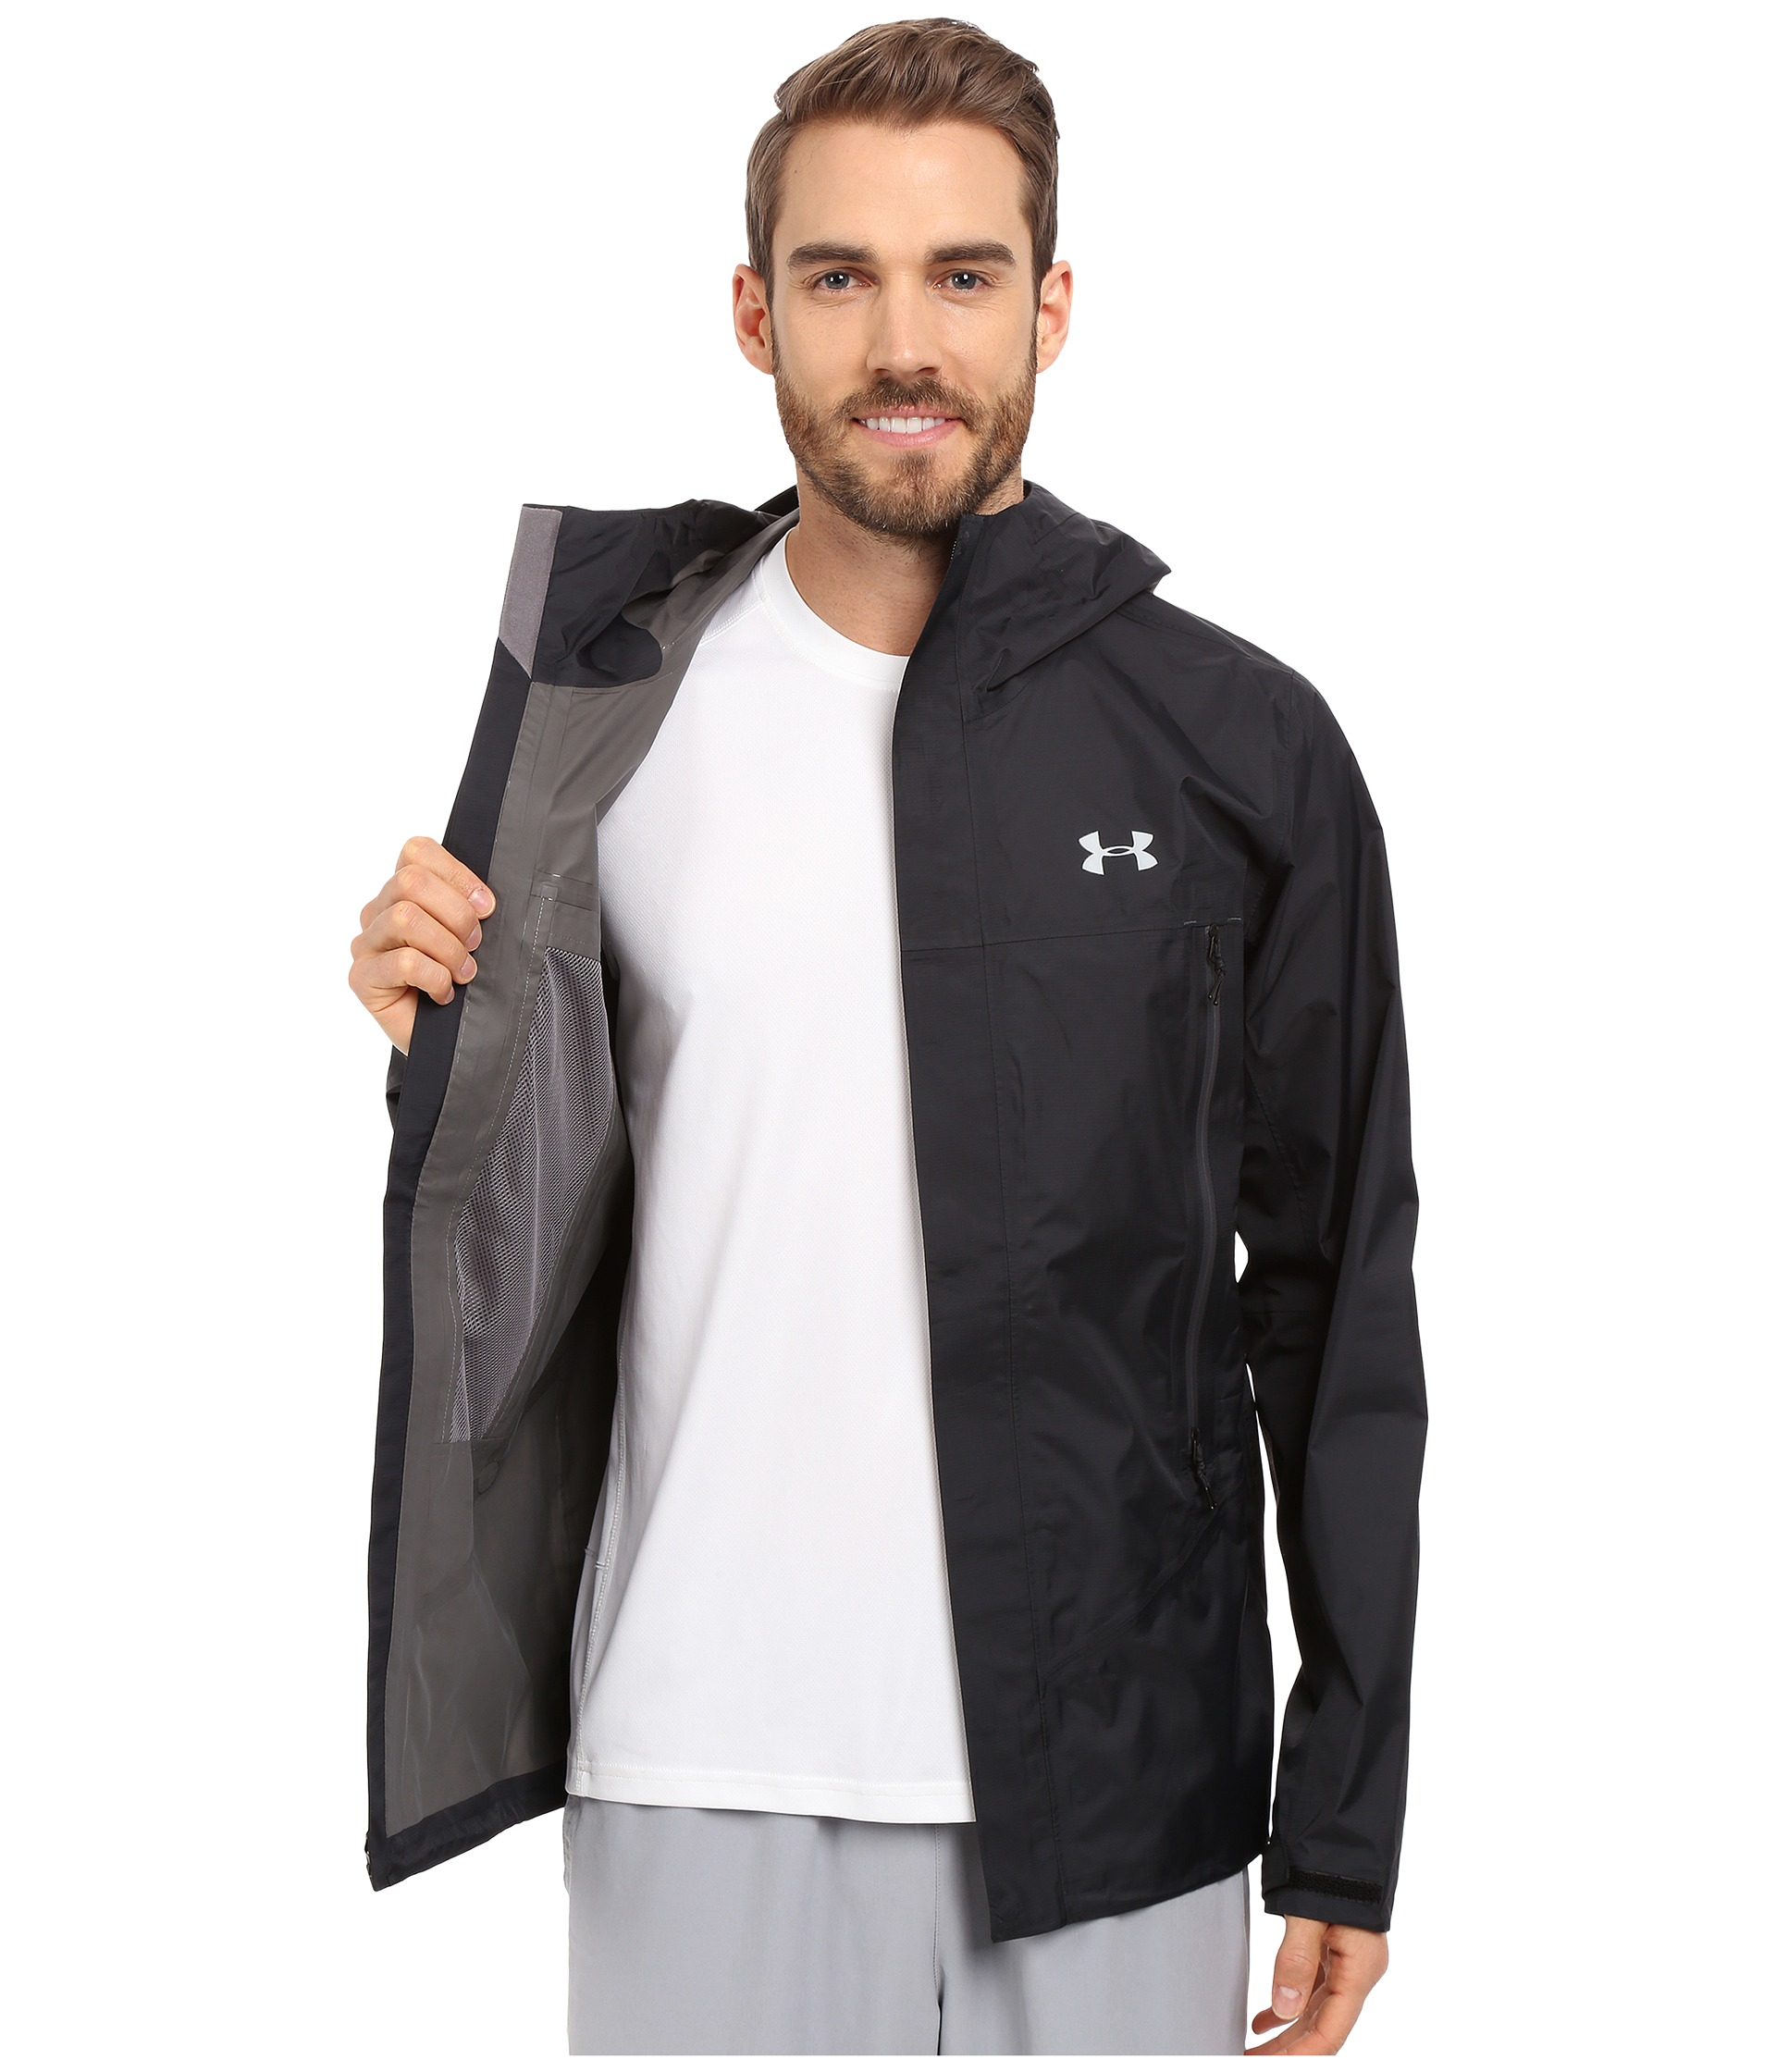 Under Armour Hurakan Paclite Jacket Online Shopping For Women Men Kids Fashion Lifestyle Free Delivery Returns